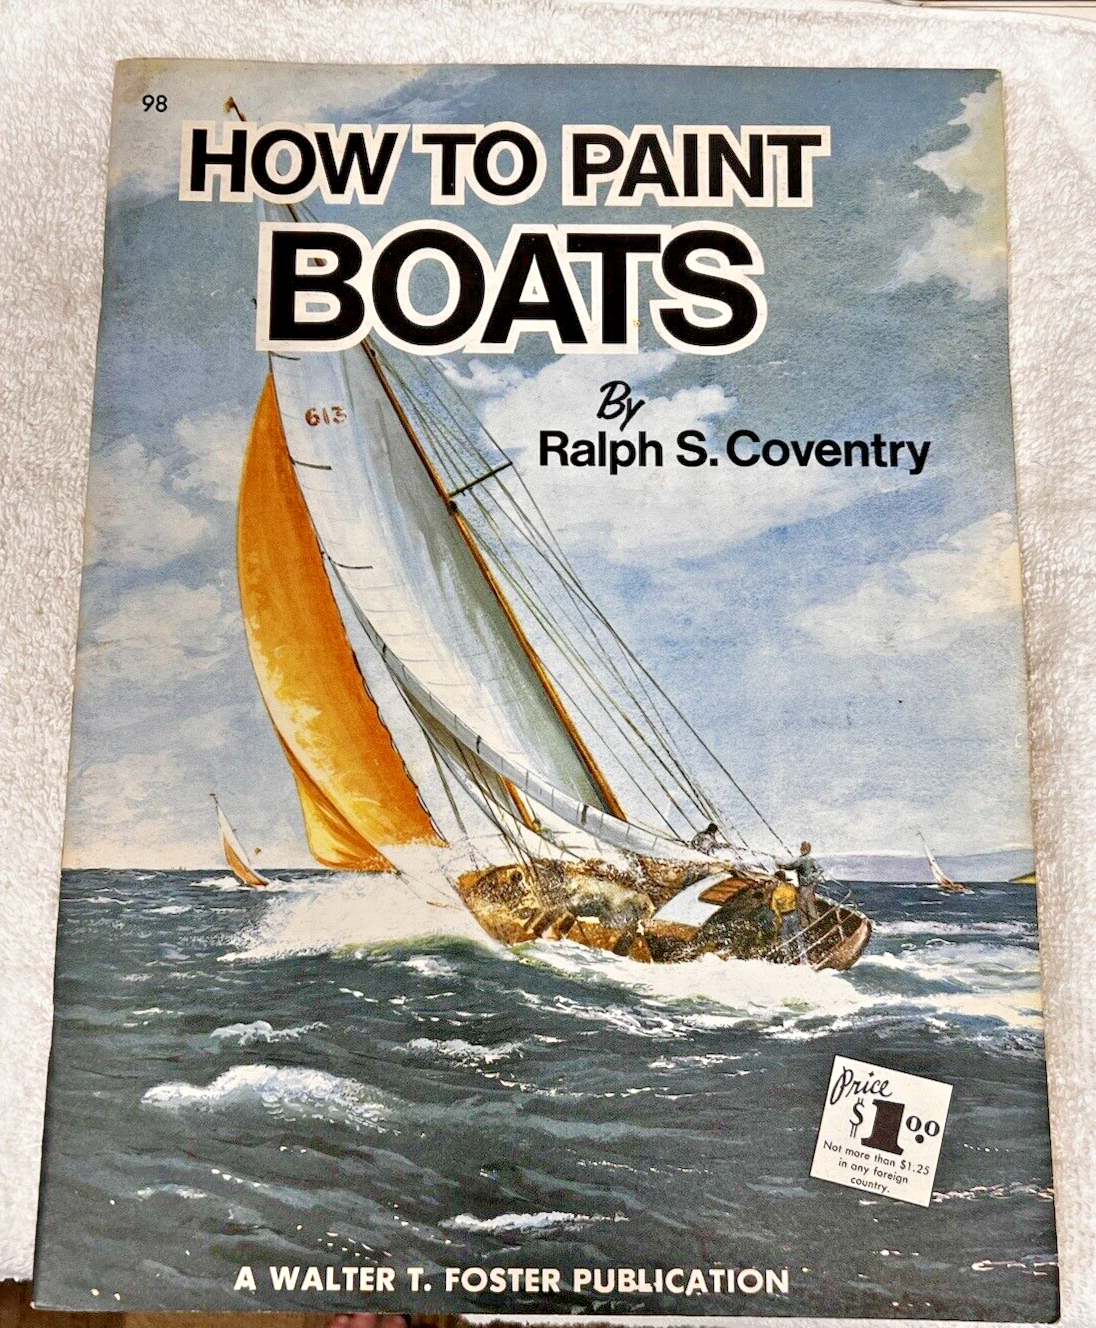 How to Paint Boats Ralph S. Coventry  Published By Walter T Foster #98 - $4.95